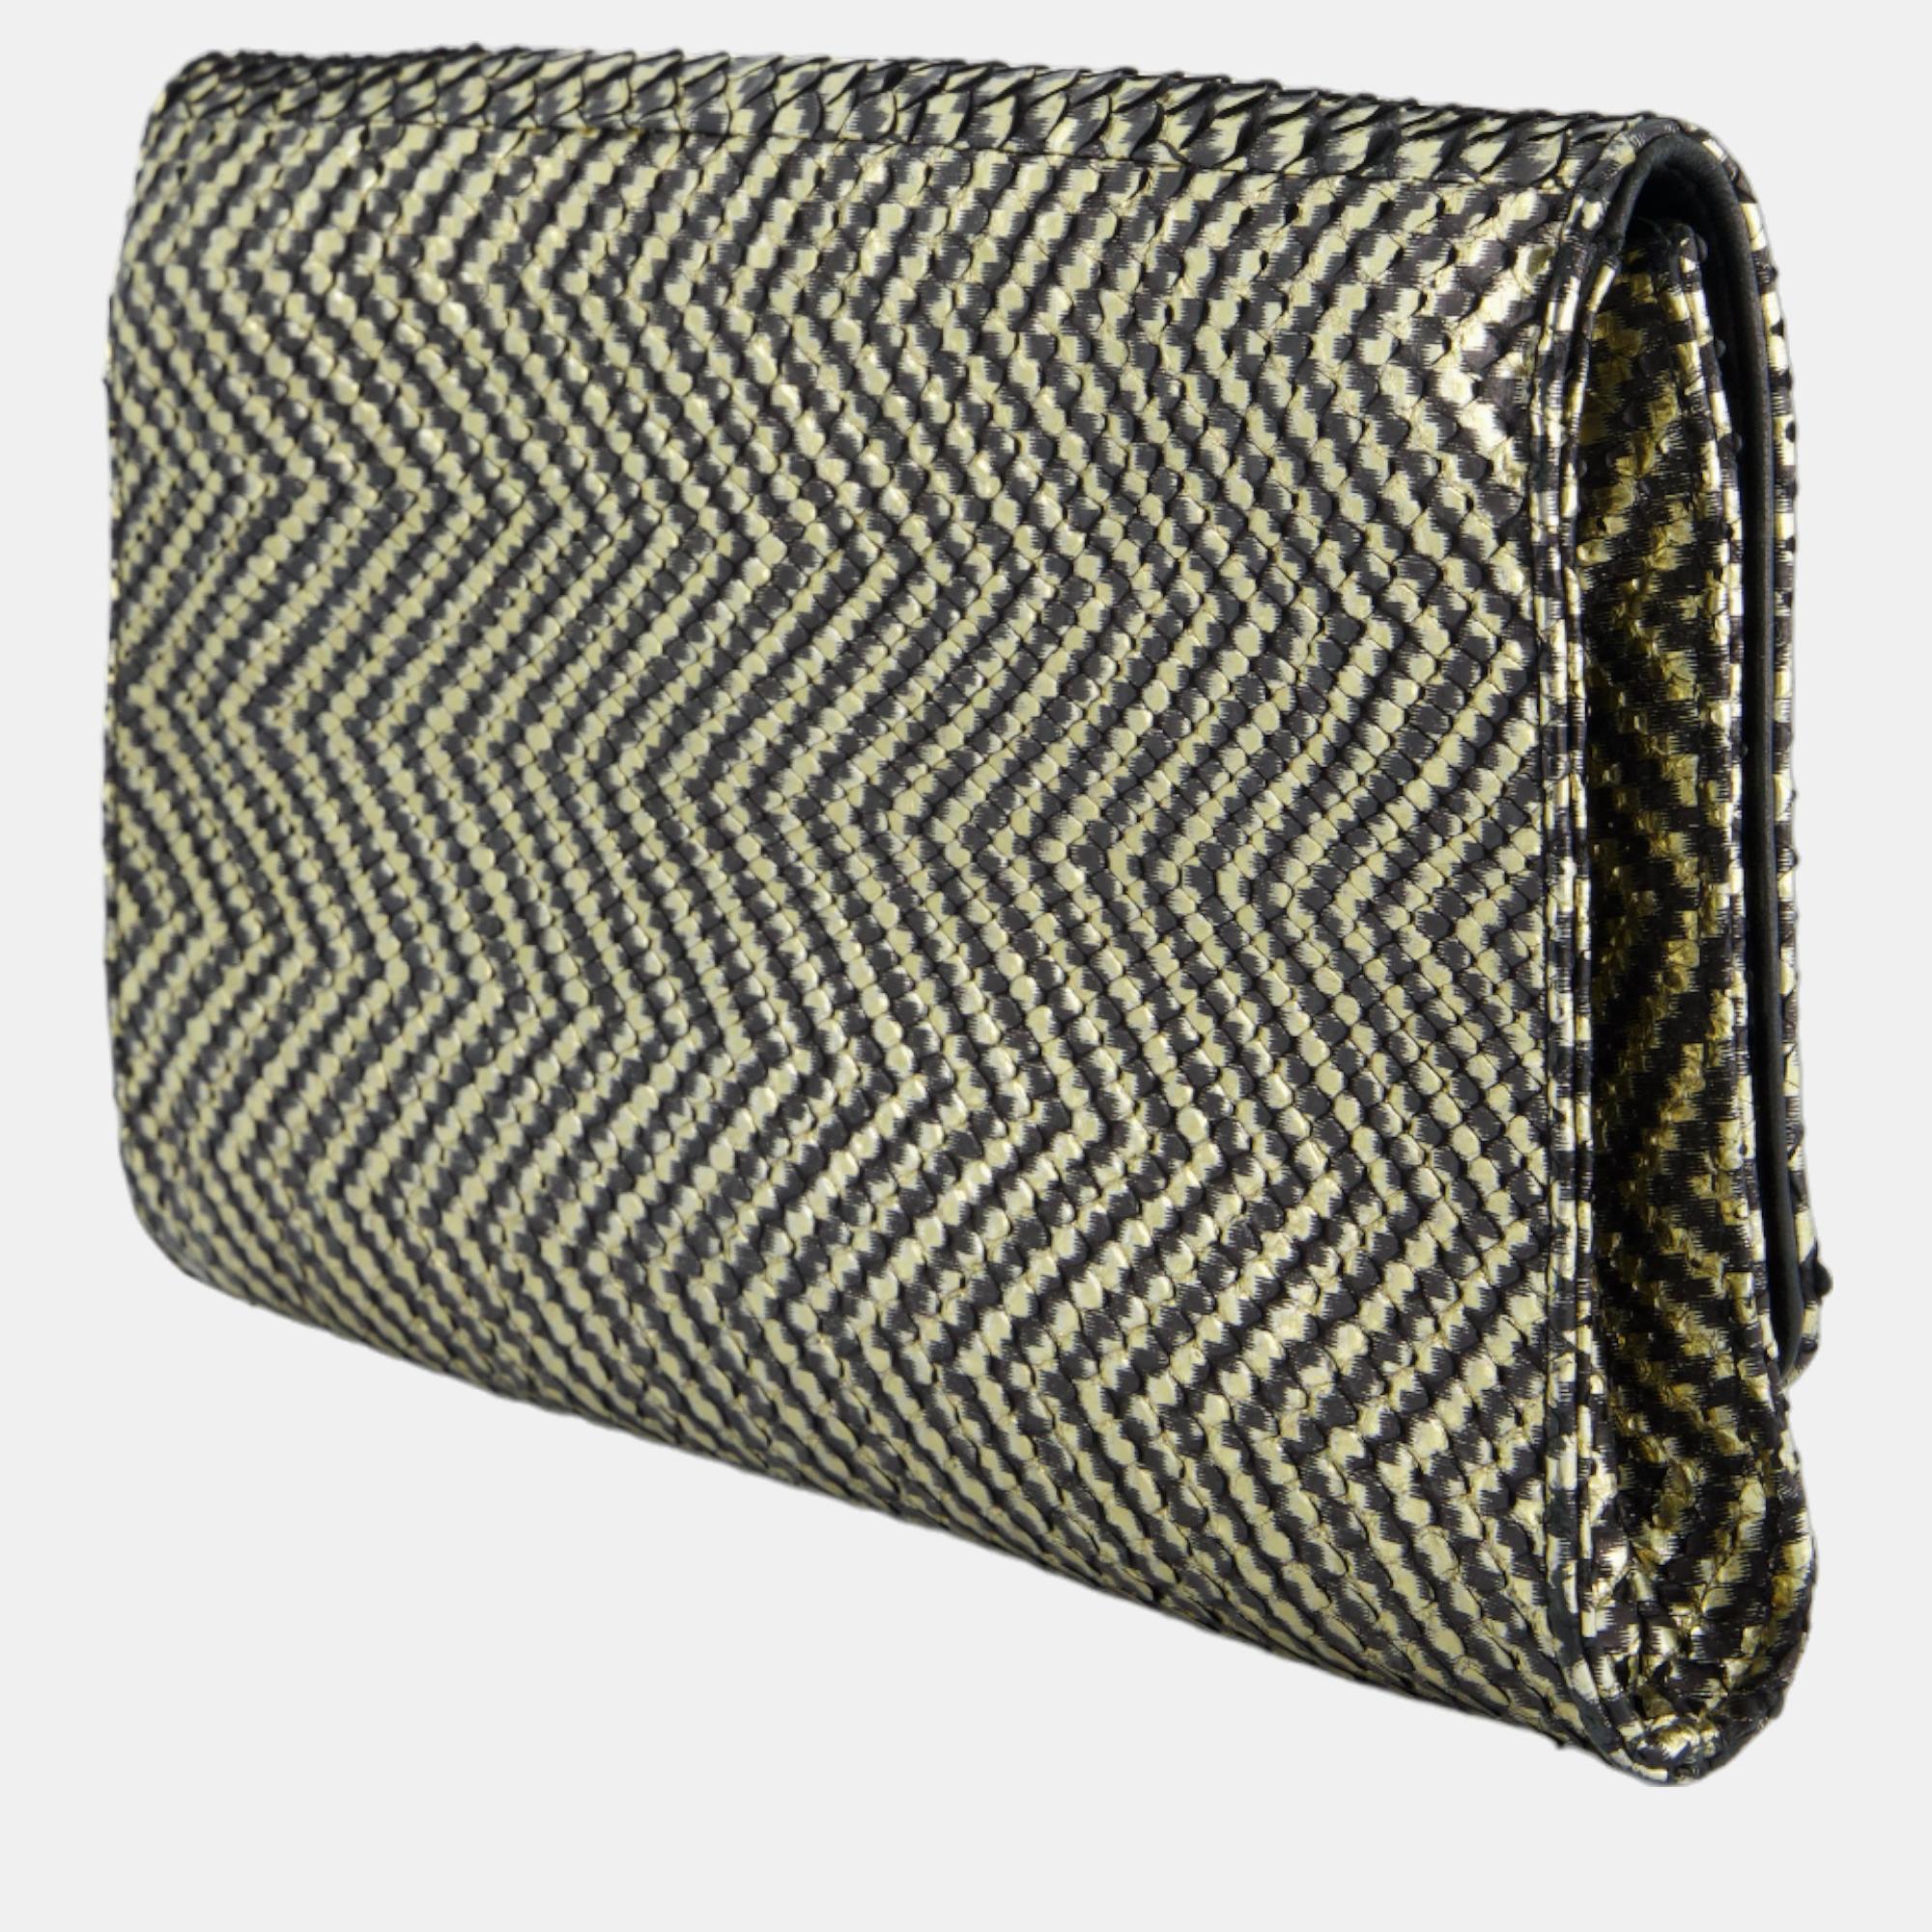 Jimmy Choo Black And Gold Python Embossed Zig Zag Clutch Bag With Gold Chain Strap